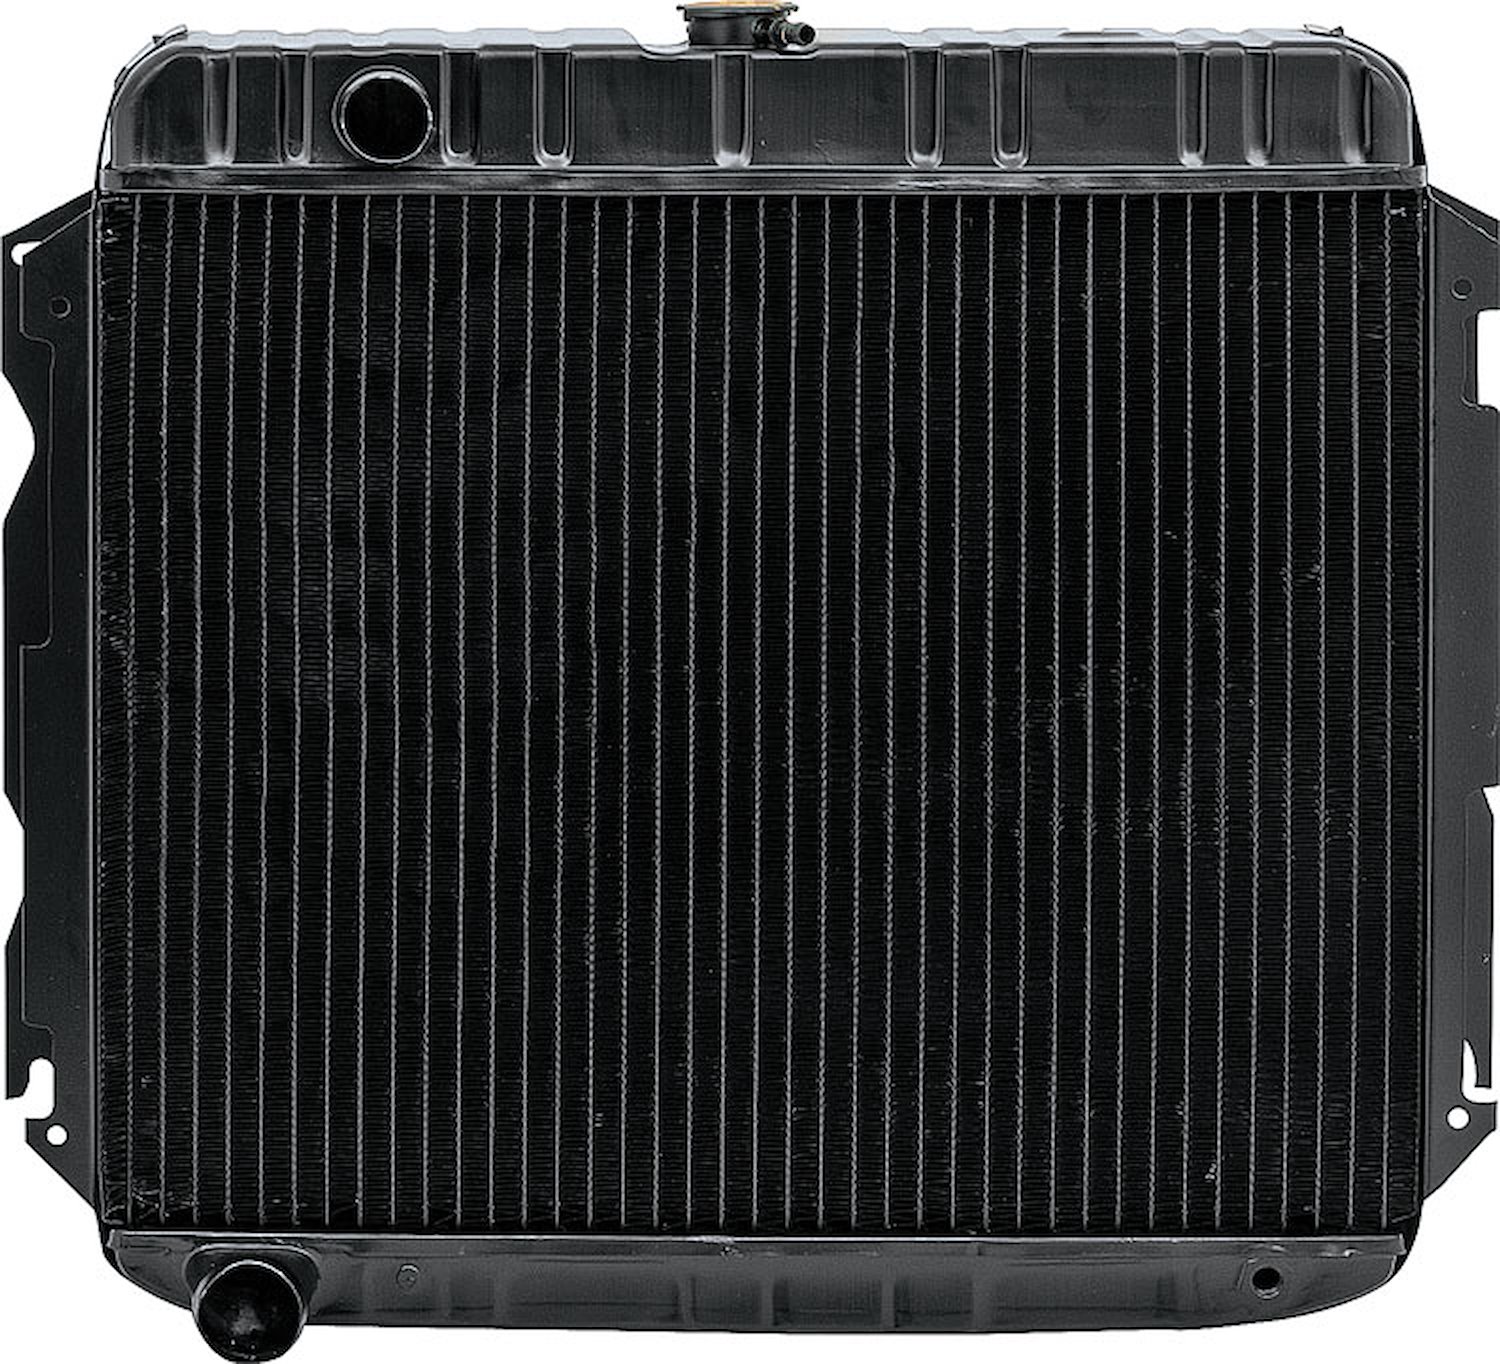 MD2289S Replacement Radiator 1970-72 Mopar B/E-Body Big Block V8 With Standard Trans 3 Row 22" Wide